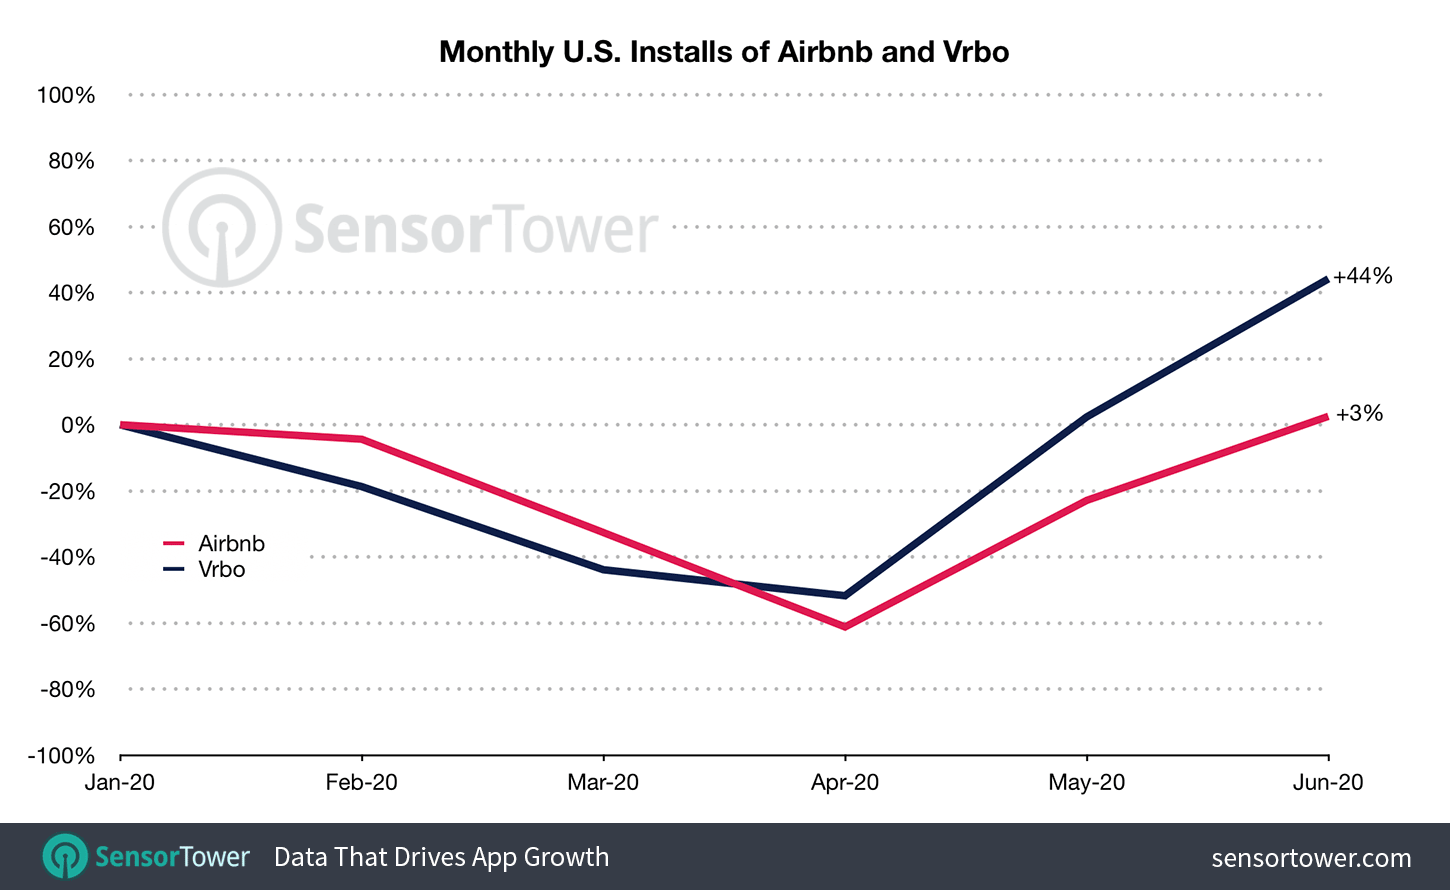 Vacation rental apps Airbnb and Vrbo saw a boost in June